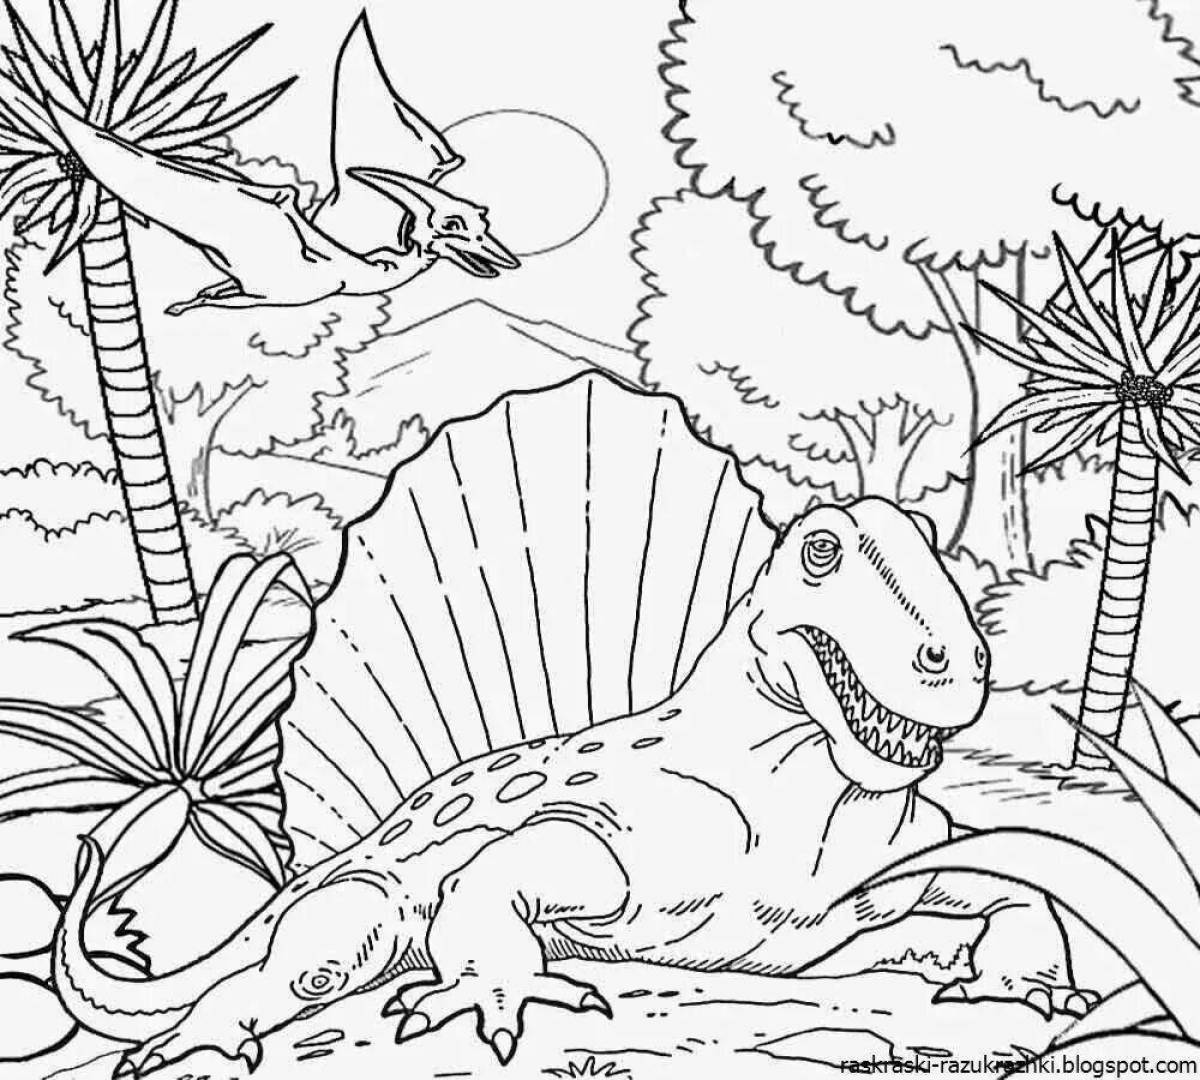 Fun coloring dinosaurs for children 7-8 years old